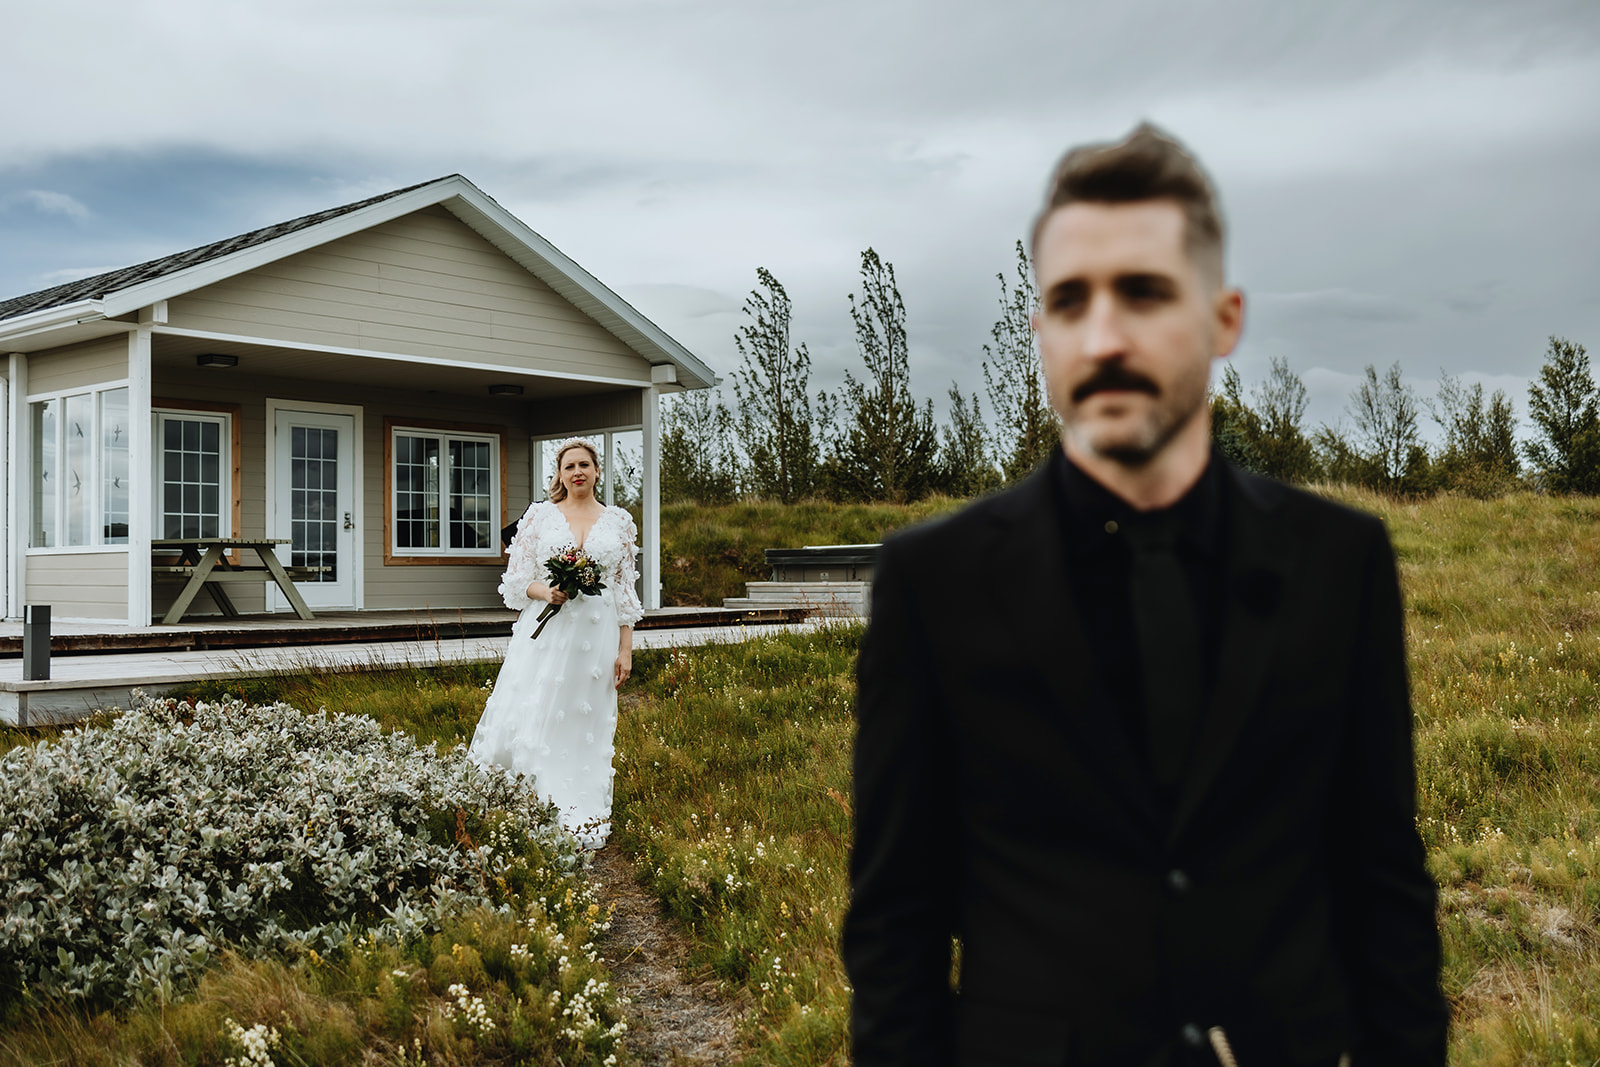 First look in Iceland in frotn of their highlands cabin.
Iceland wedding and elopement photographer.